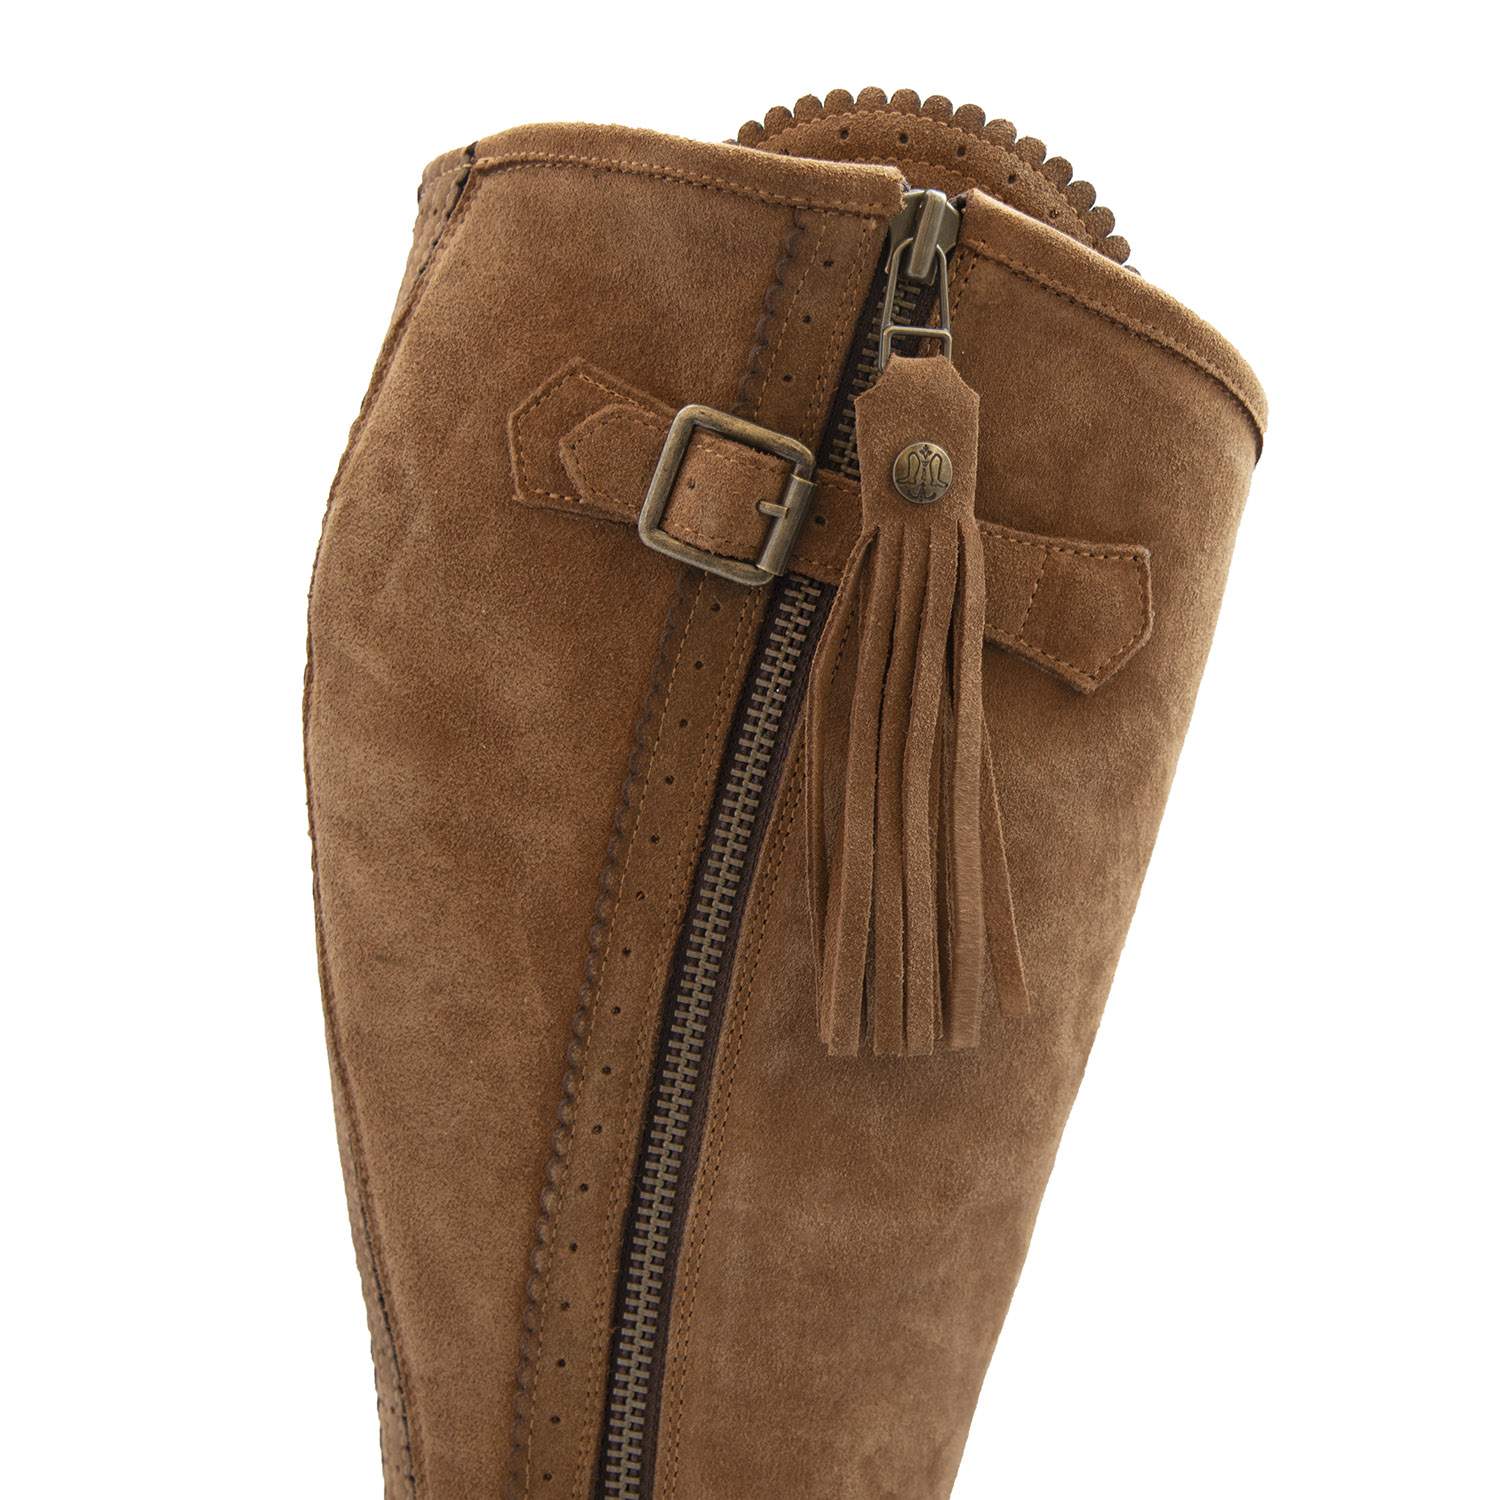 SALE Orla Spanish Boot SHORT/WIDE FIT